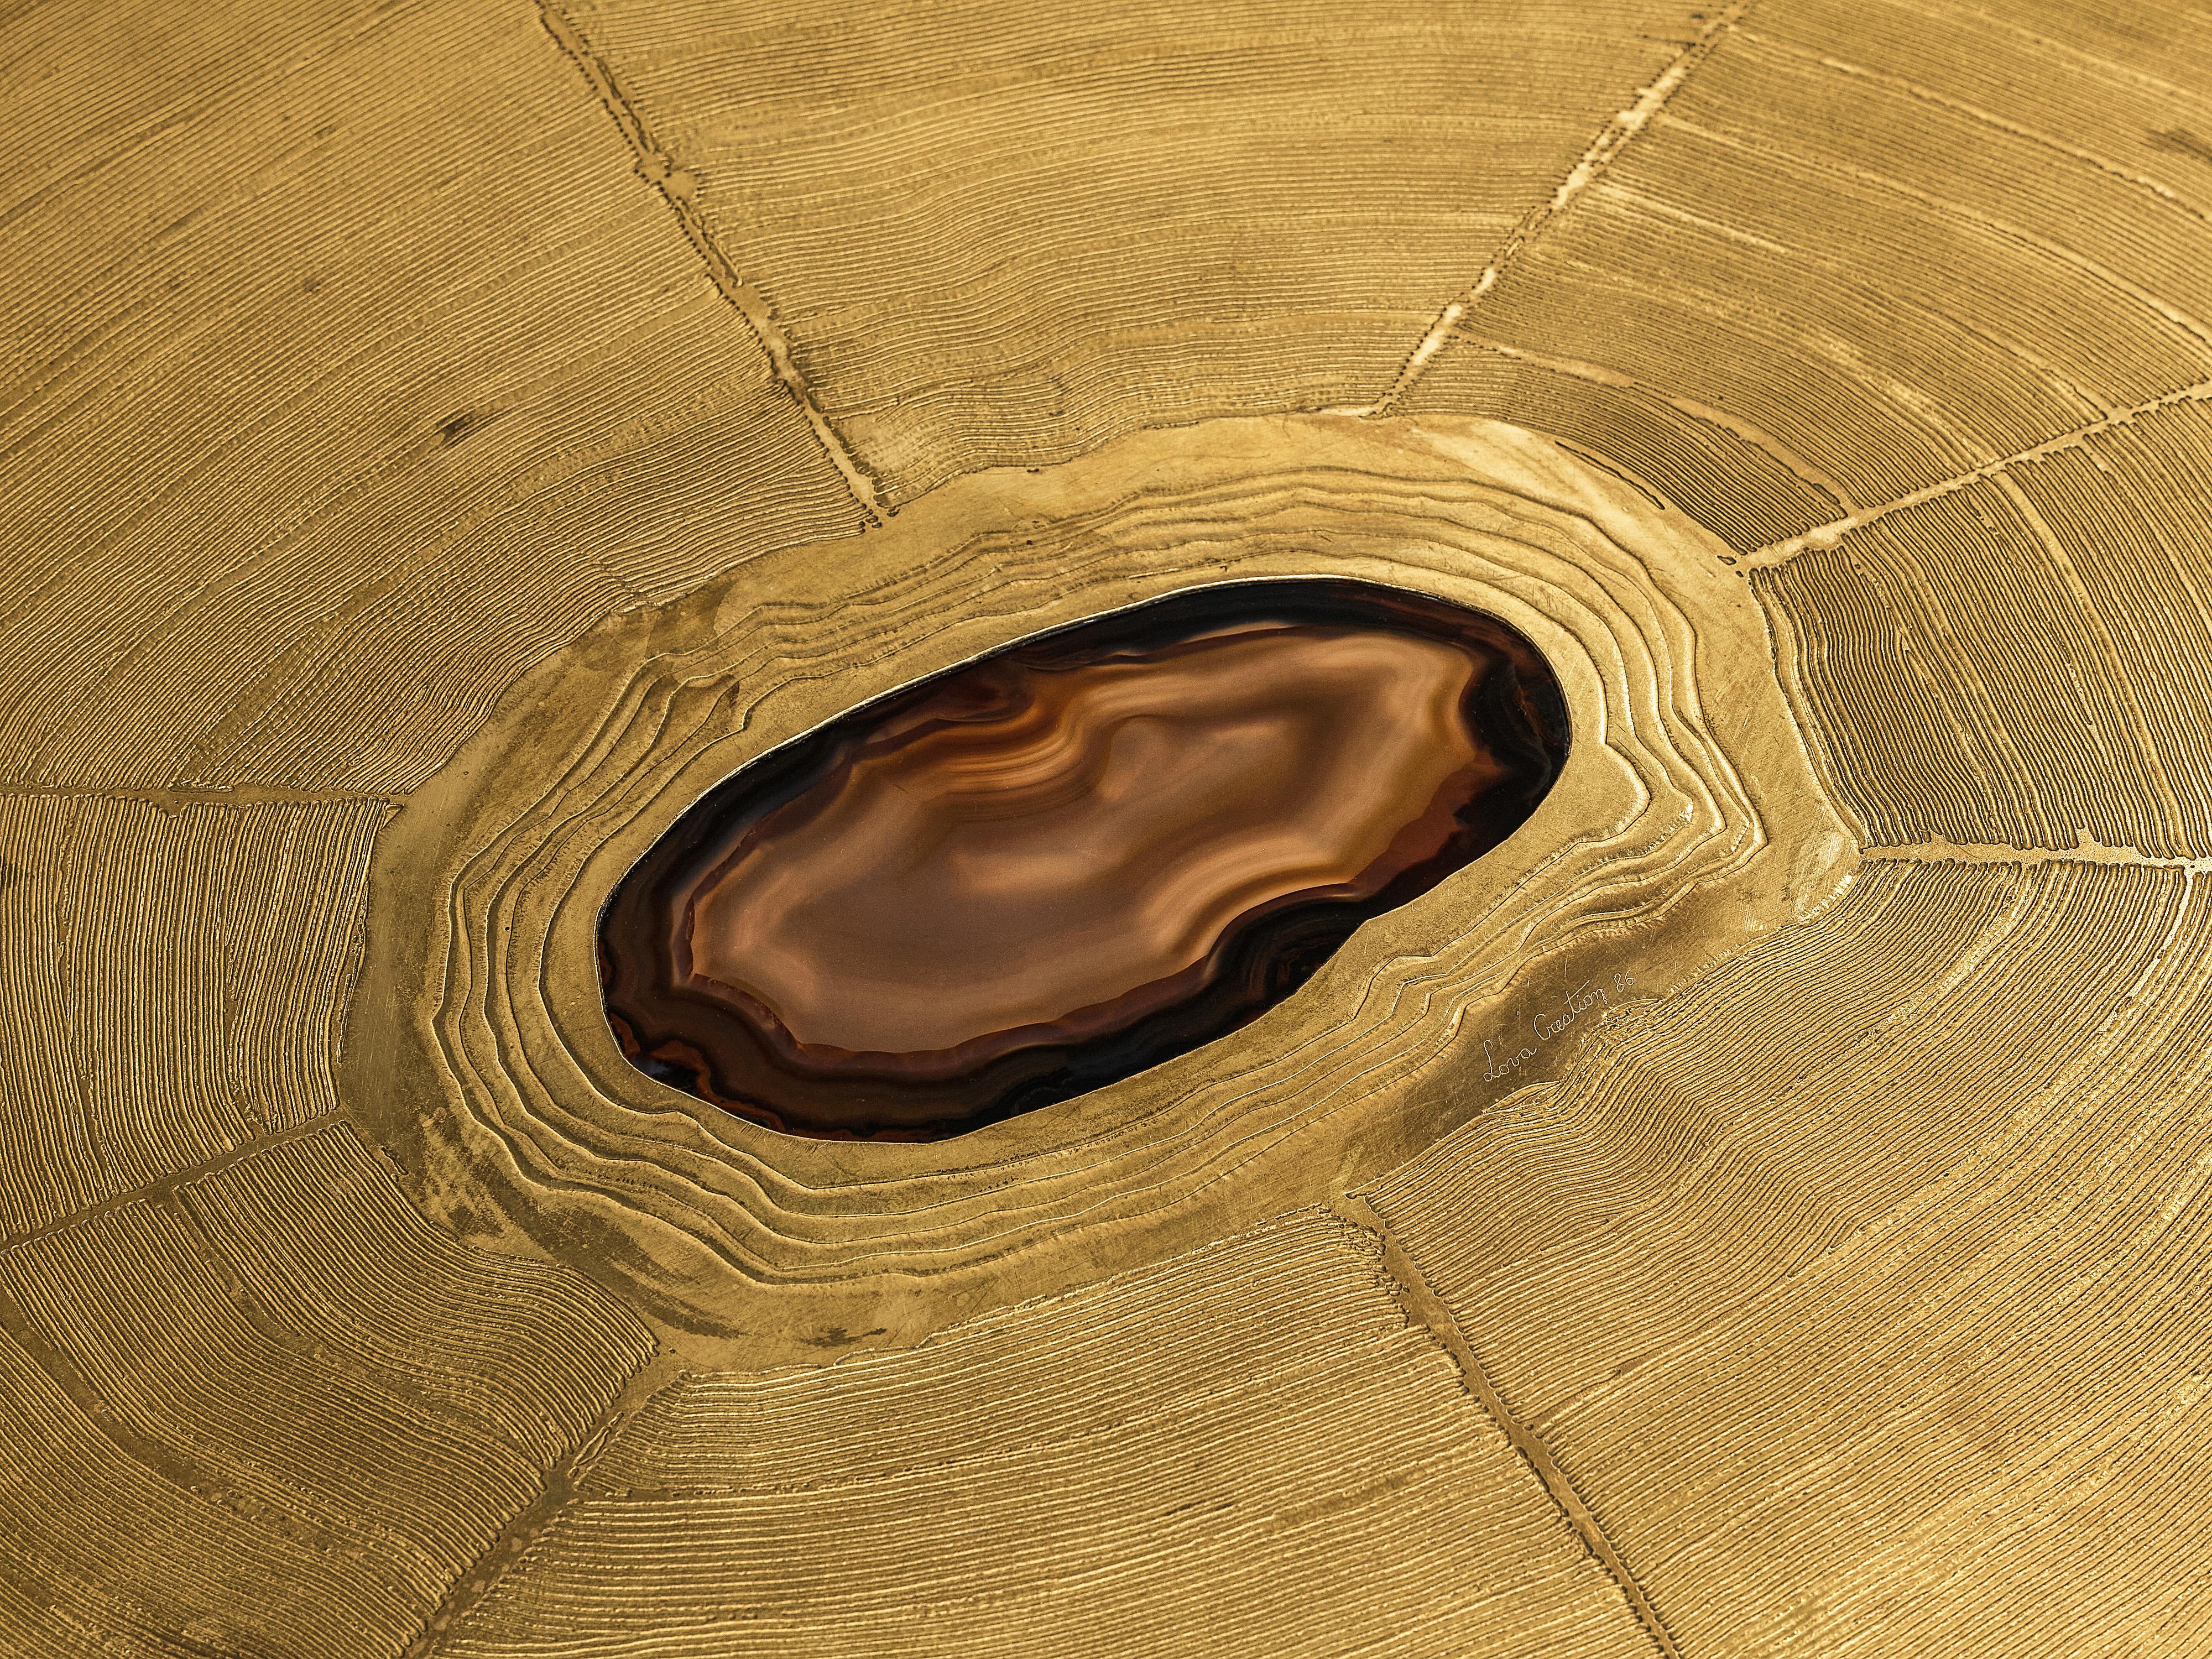 agate coffee table